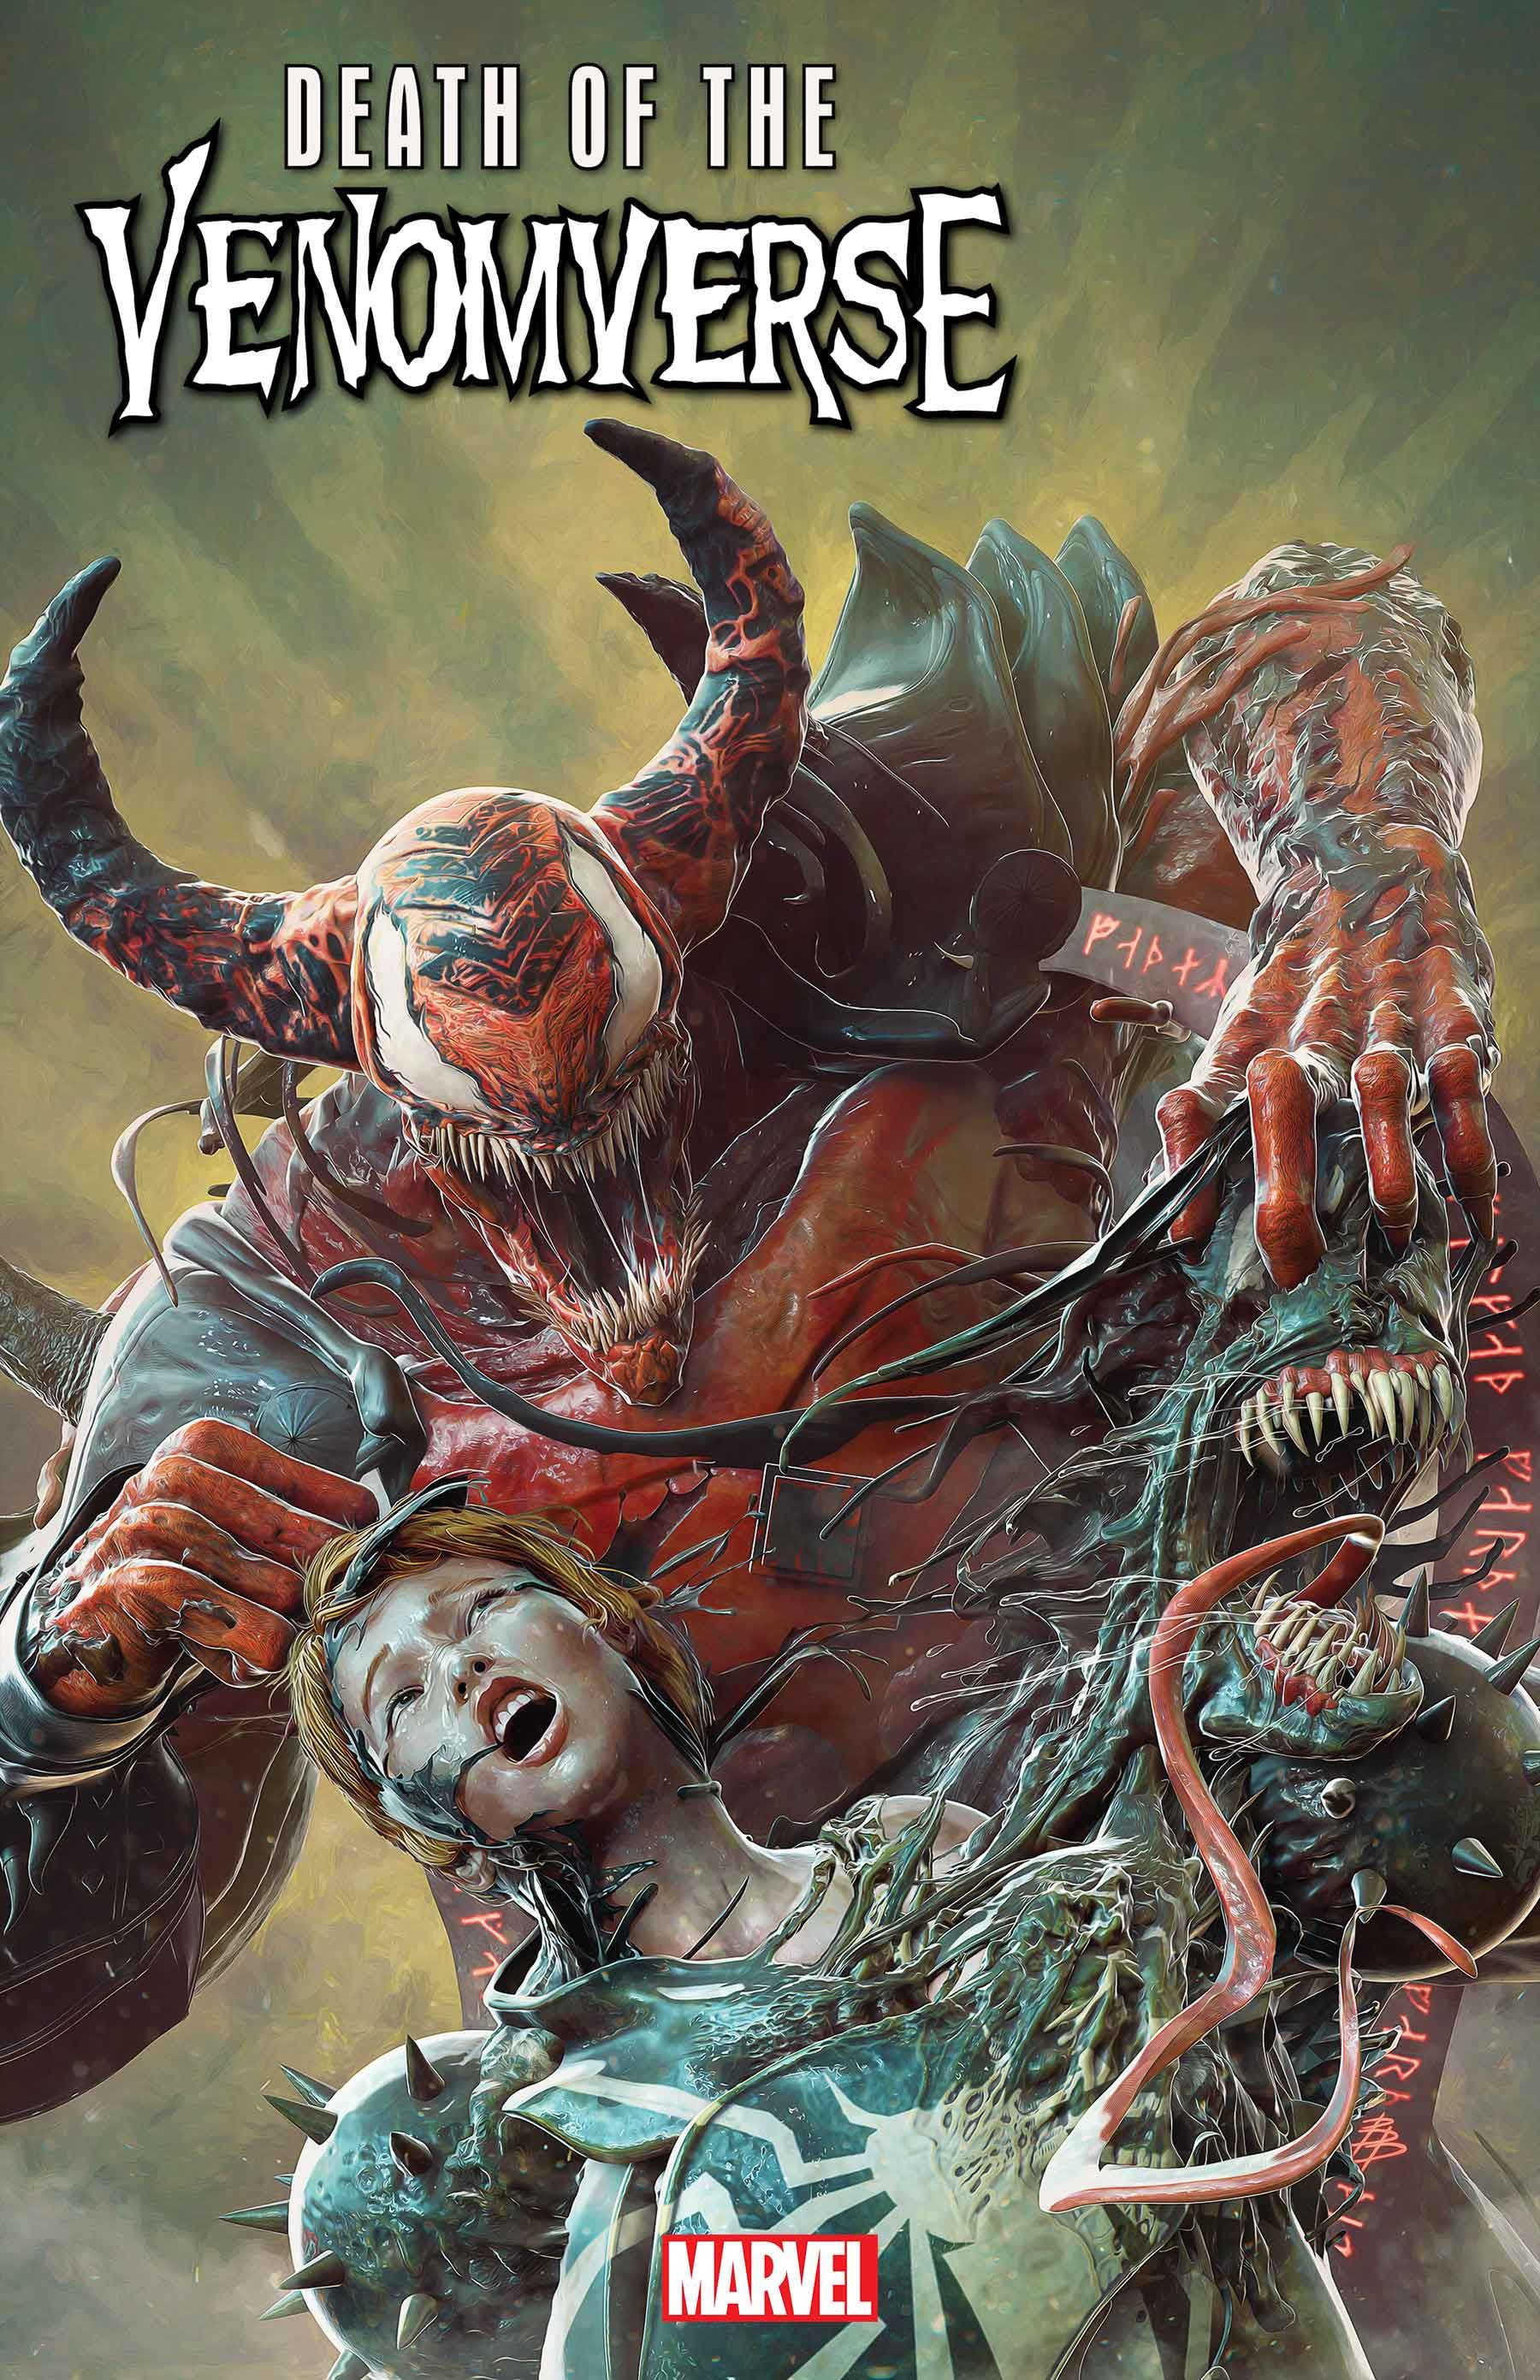 Cover artwork by Björn Barends for Marvel Comics' Death of the Venomverse #4 (2023).